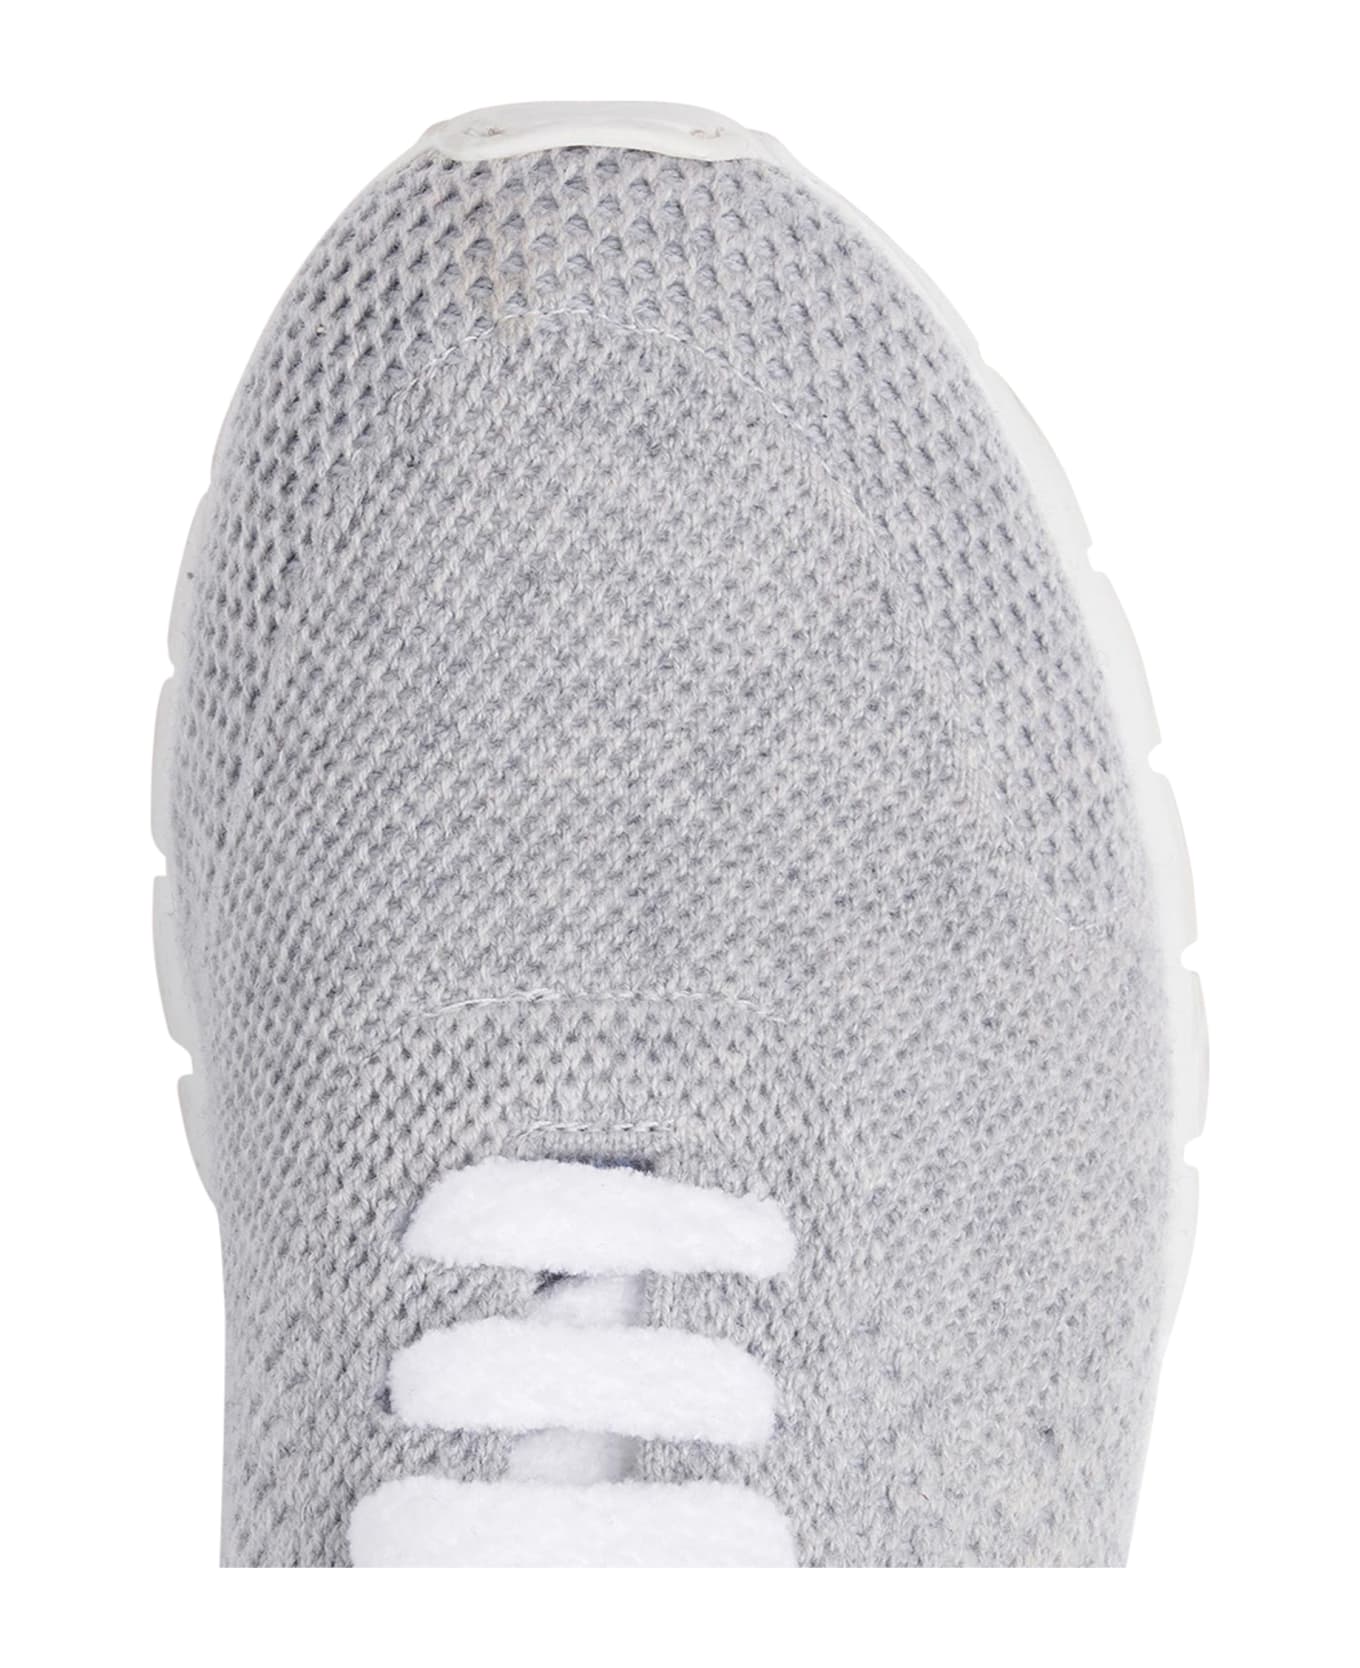 Kiton Fits - Sneakers Shoes Cashmere - MEDIUM GREY